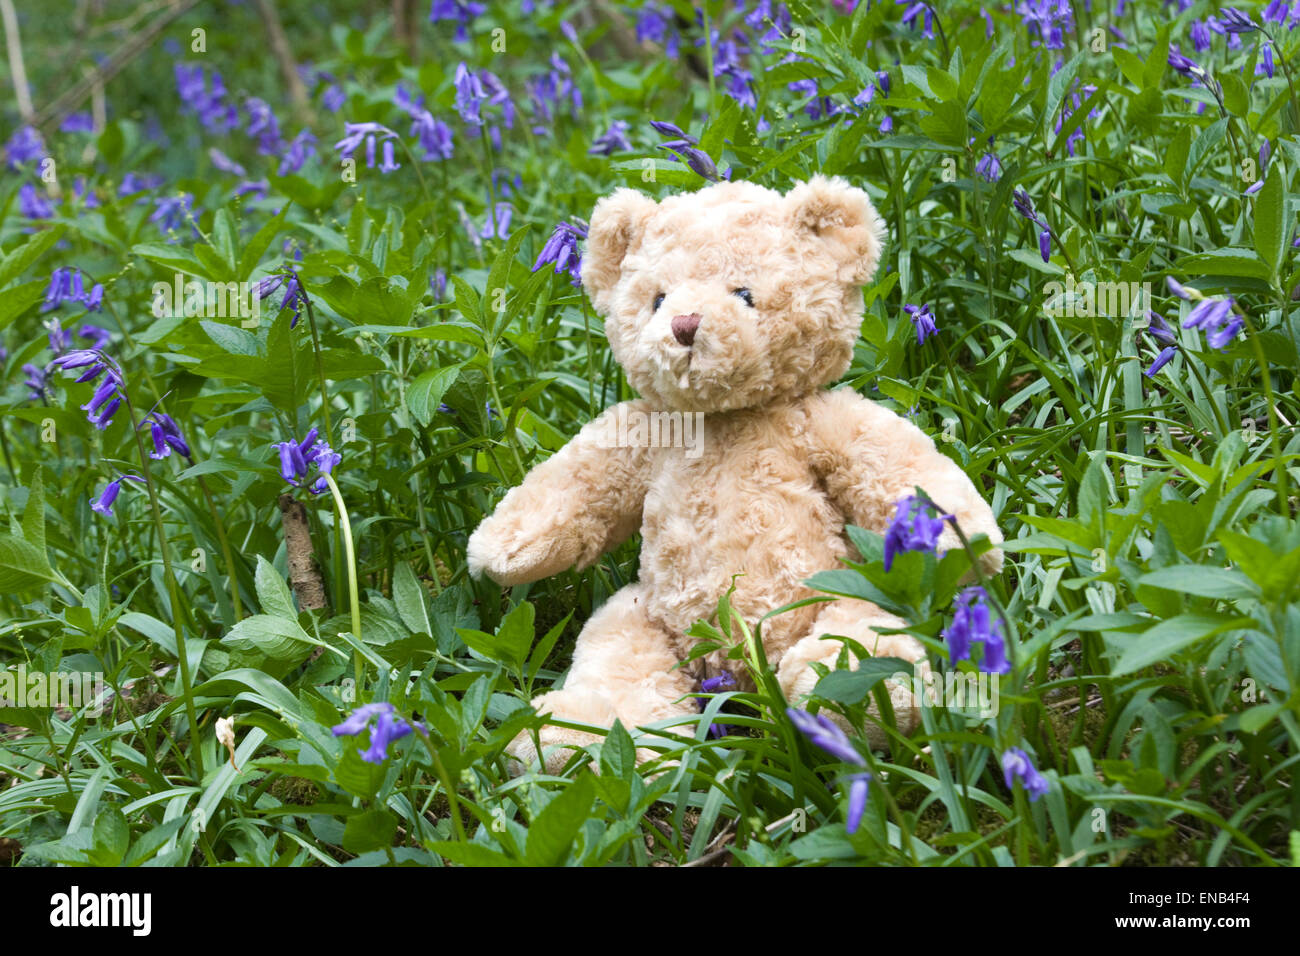 Teddy Bear sitting on a the grass surrounded by Bluebells Stock Photo